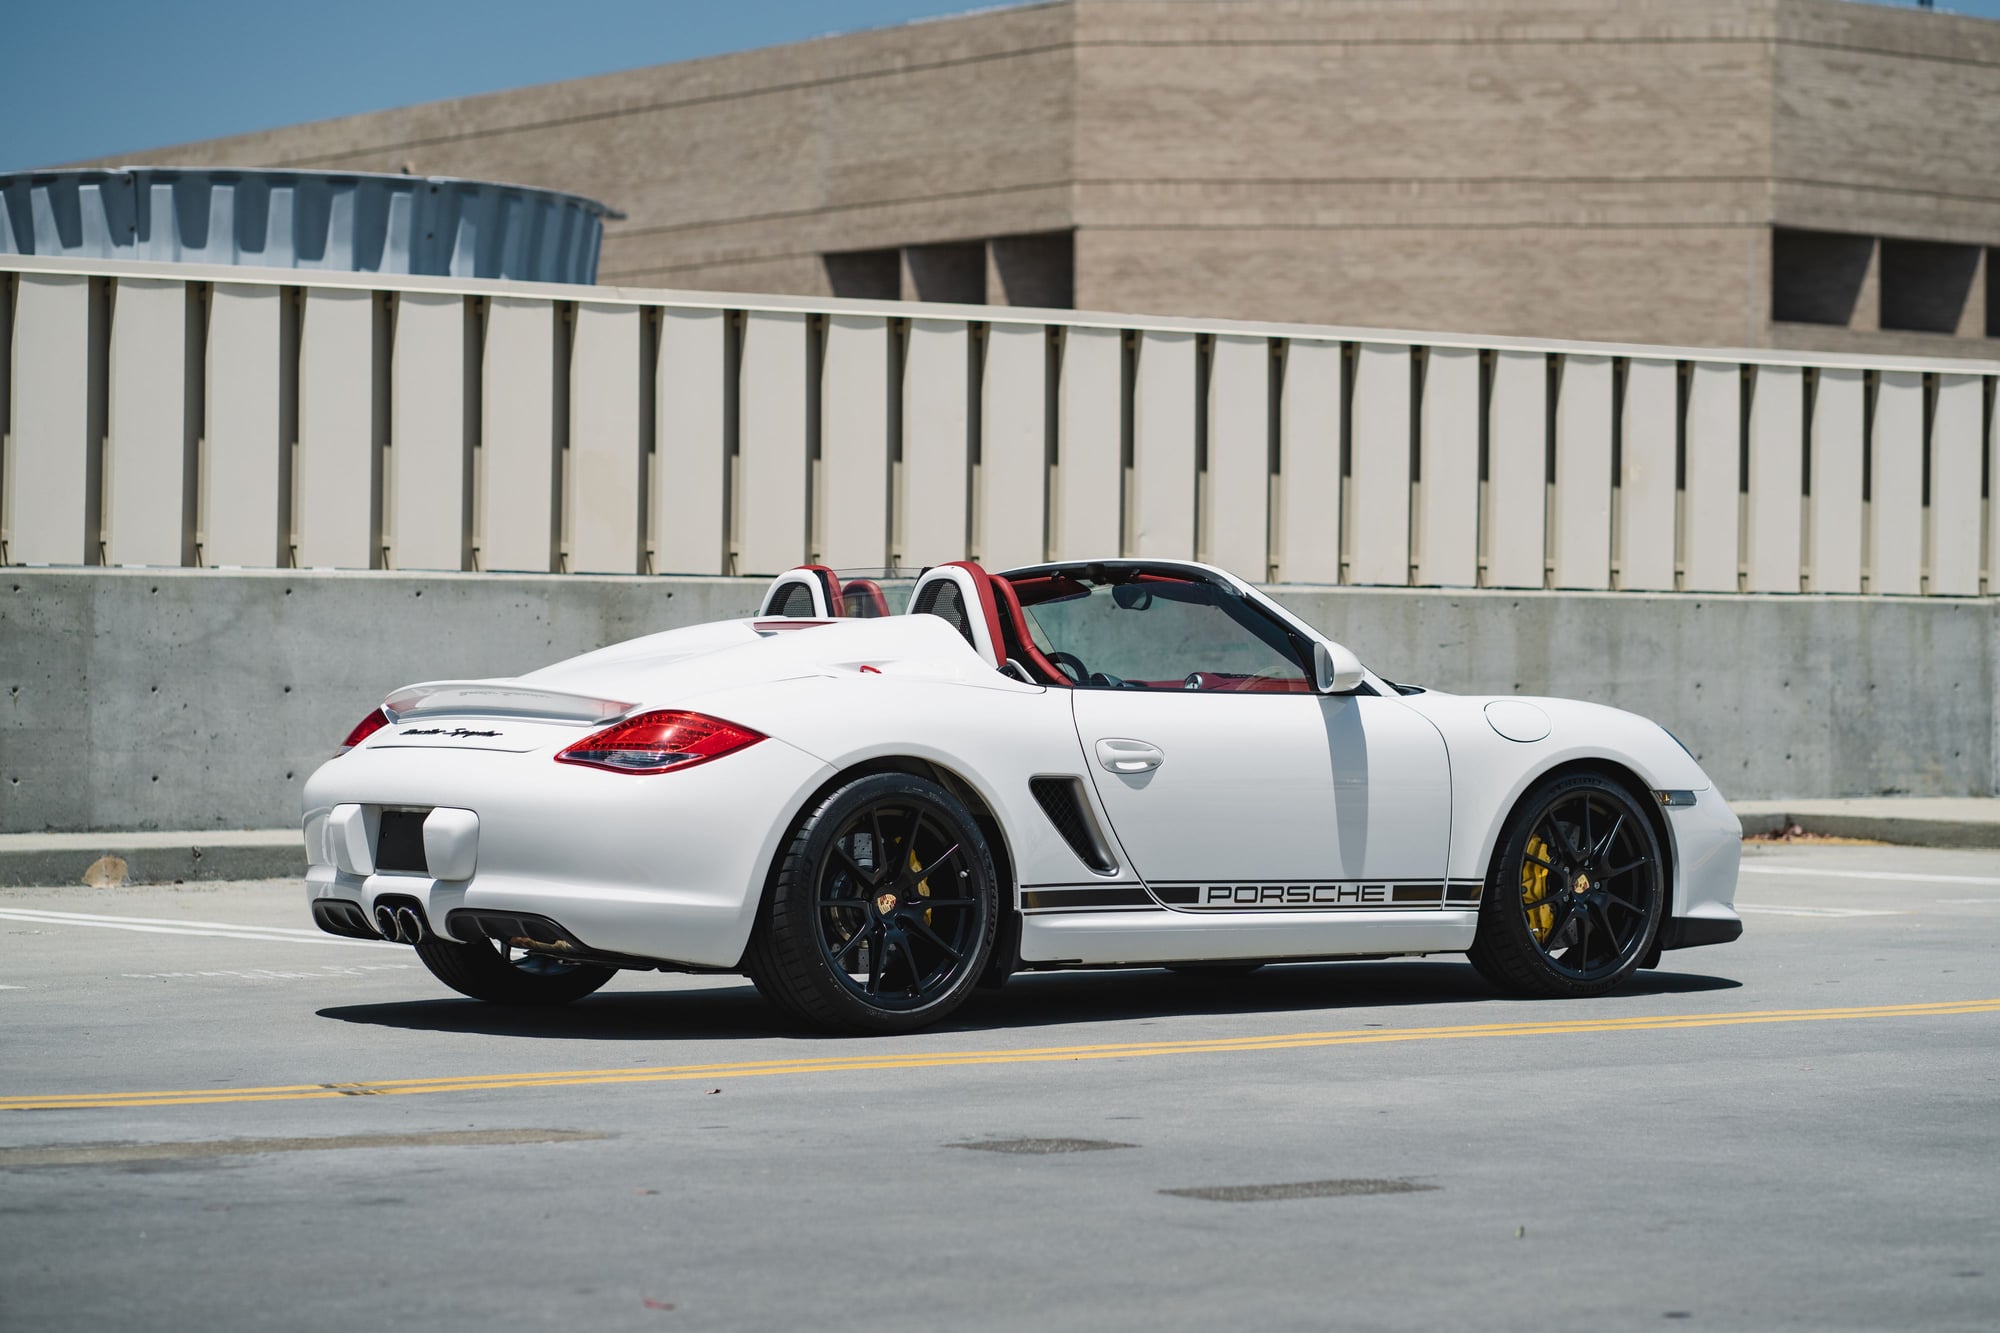 2011 Porsche Boxster - 2011 Boxster Spyder w/ 5k Miles, Folding Carbon Buckets and Over $30k in Options - Used - VIN WP0CB2A89BS745540 - 5,306 Miles - 6 cyl - 2WD - Manual - Convertible - White - Redwood City, CA 94063, United States